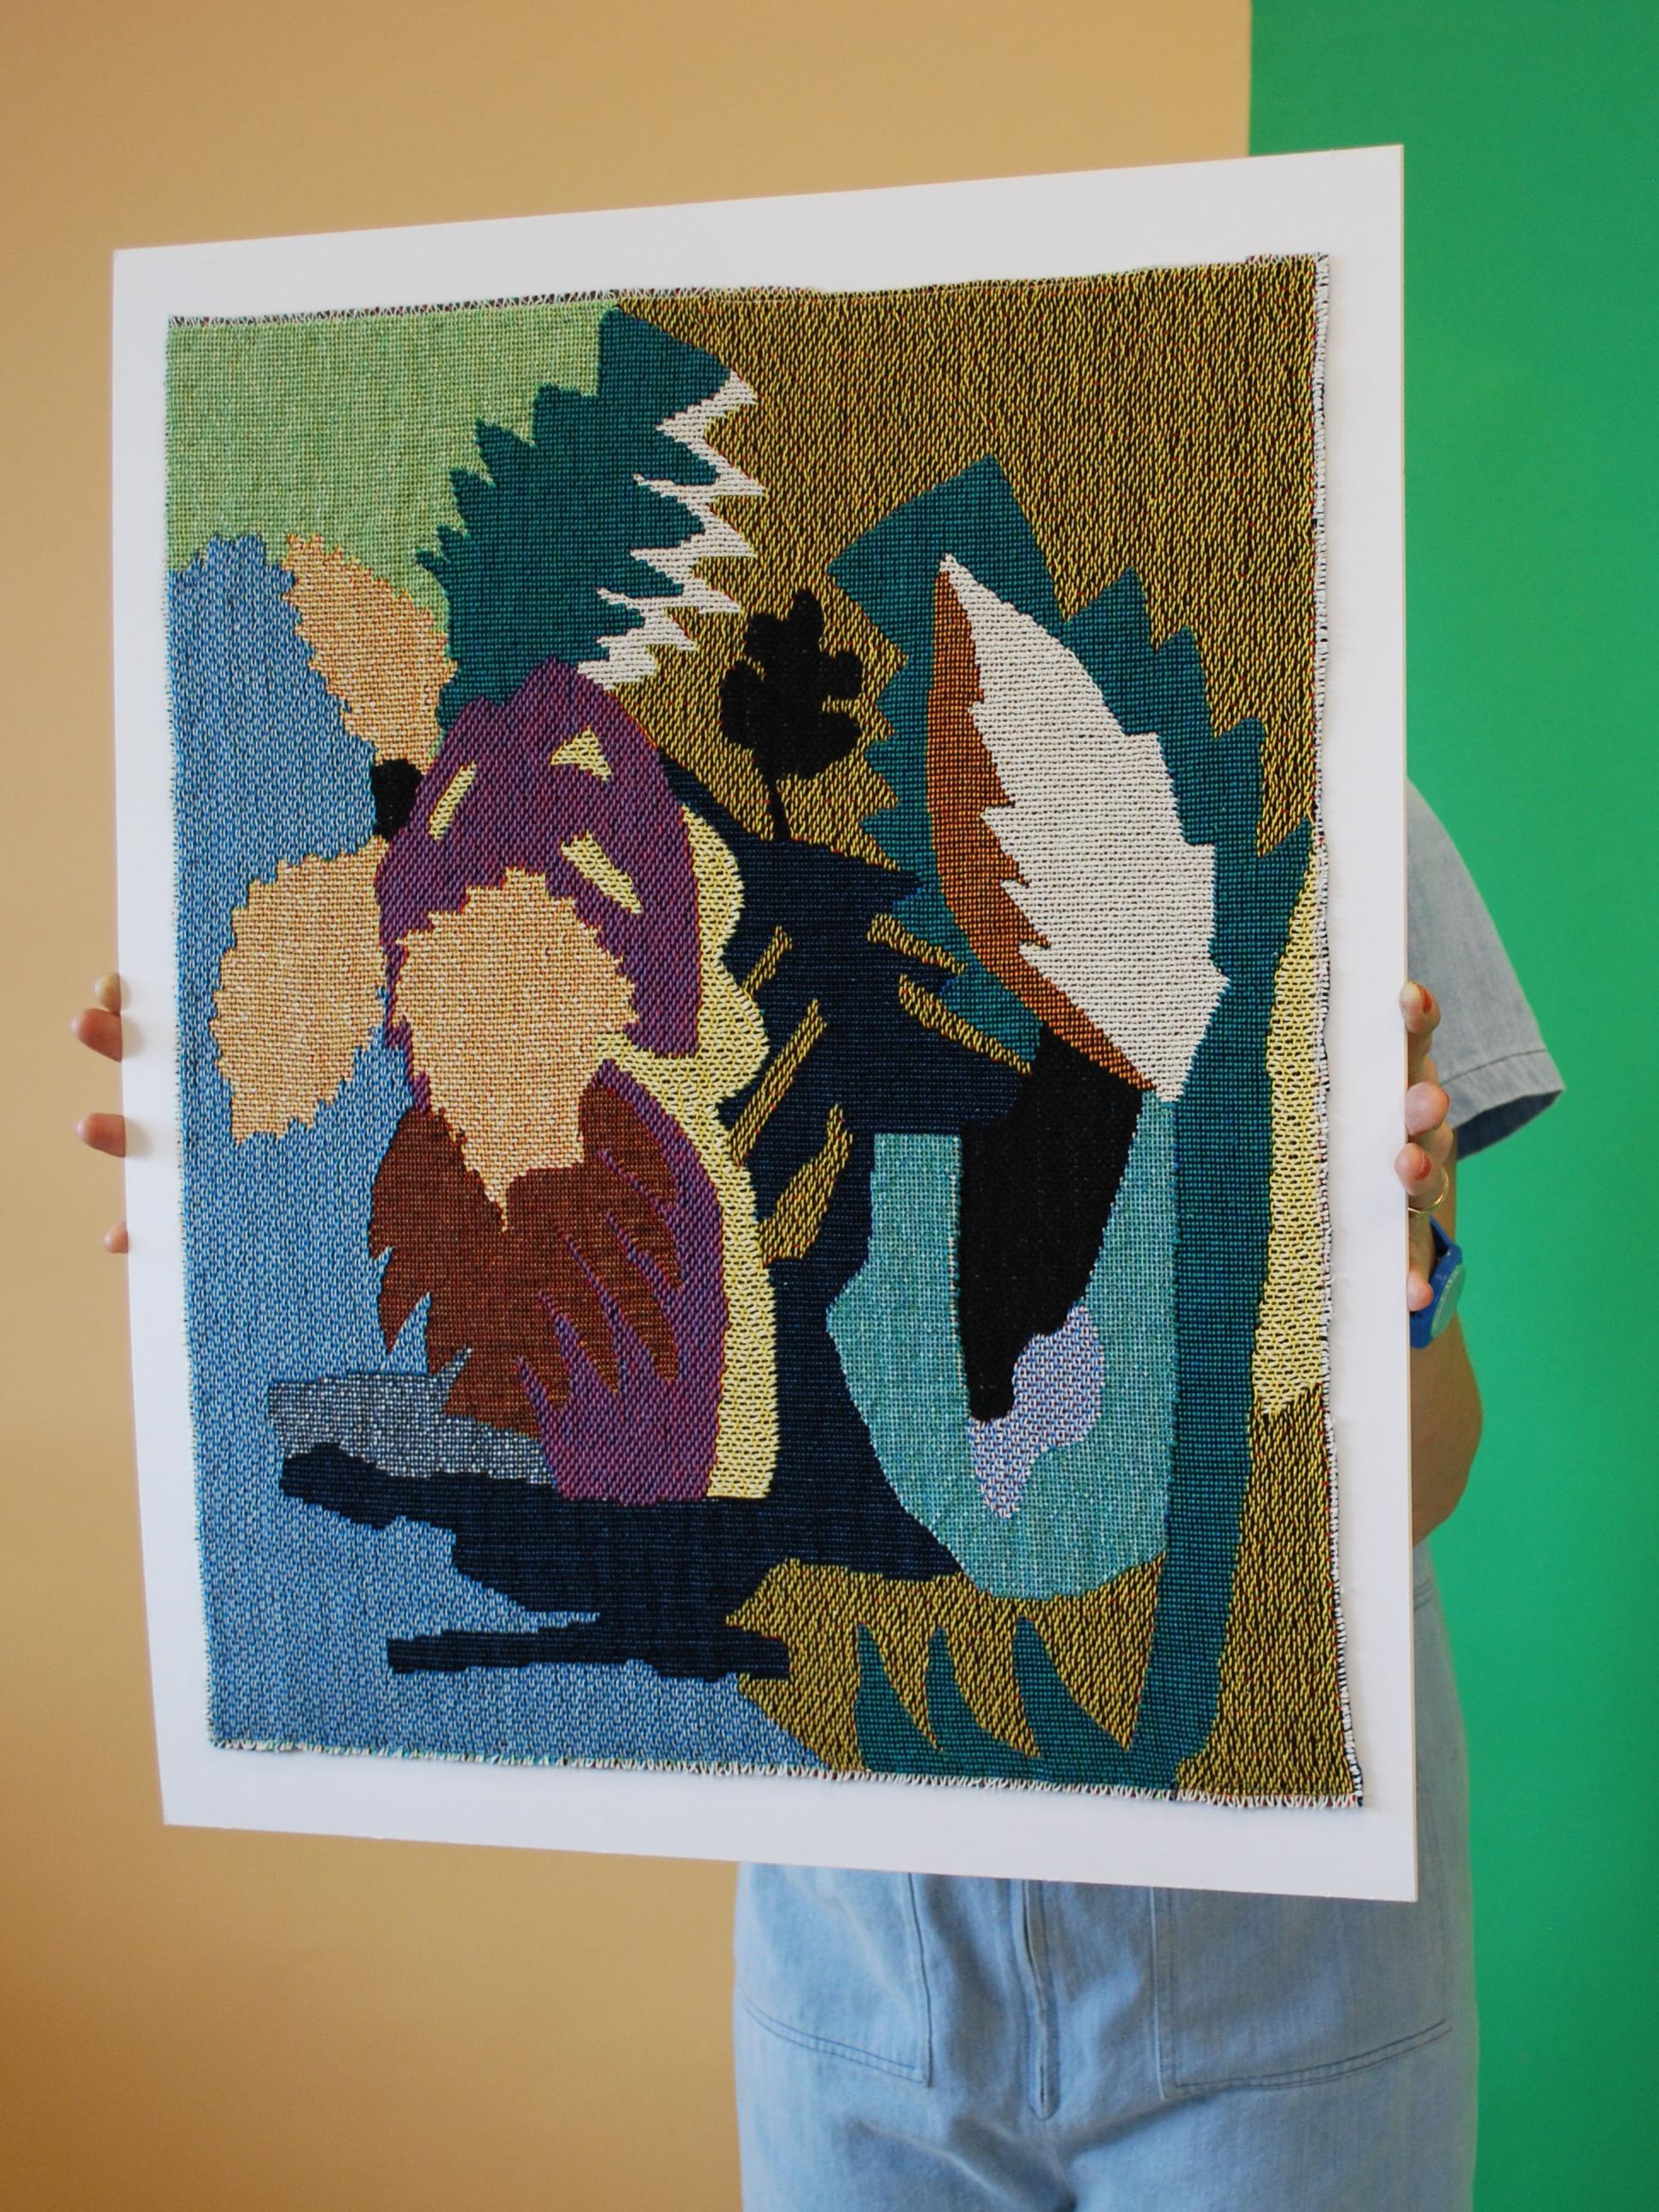 Abstract Nature Study tapestry is a one-of-a-kind woven art piece. 100% Cotton, Jacquard woven and stitched to white mat board for easy framing.

Matted Measures: 24” x 19”

Ready to ship.

*Due to Covid and the small independent nature of our